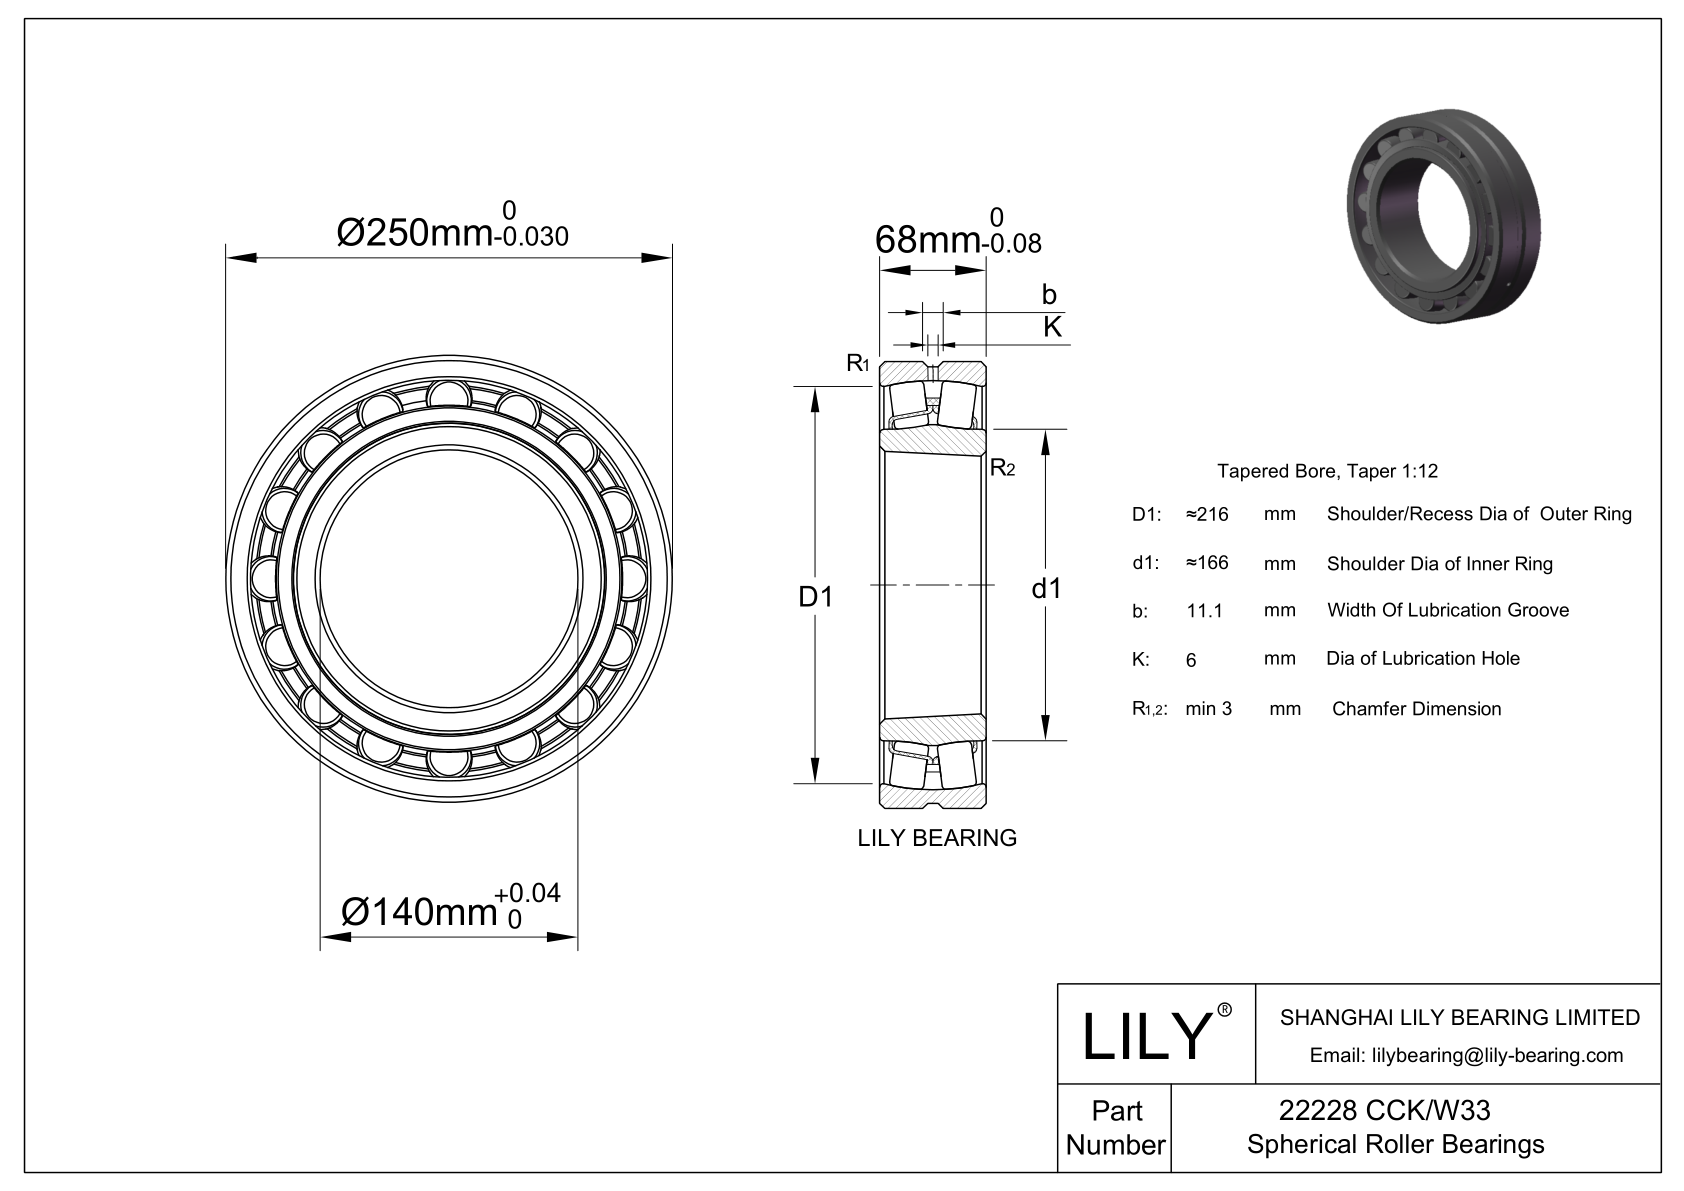 22228 CCK/W33 Double Row Spherical Roller Bearing cad drawing